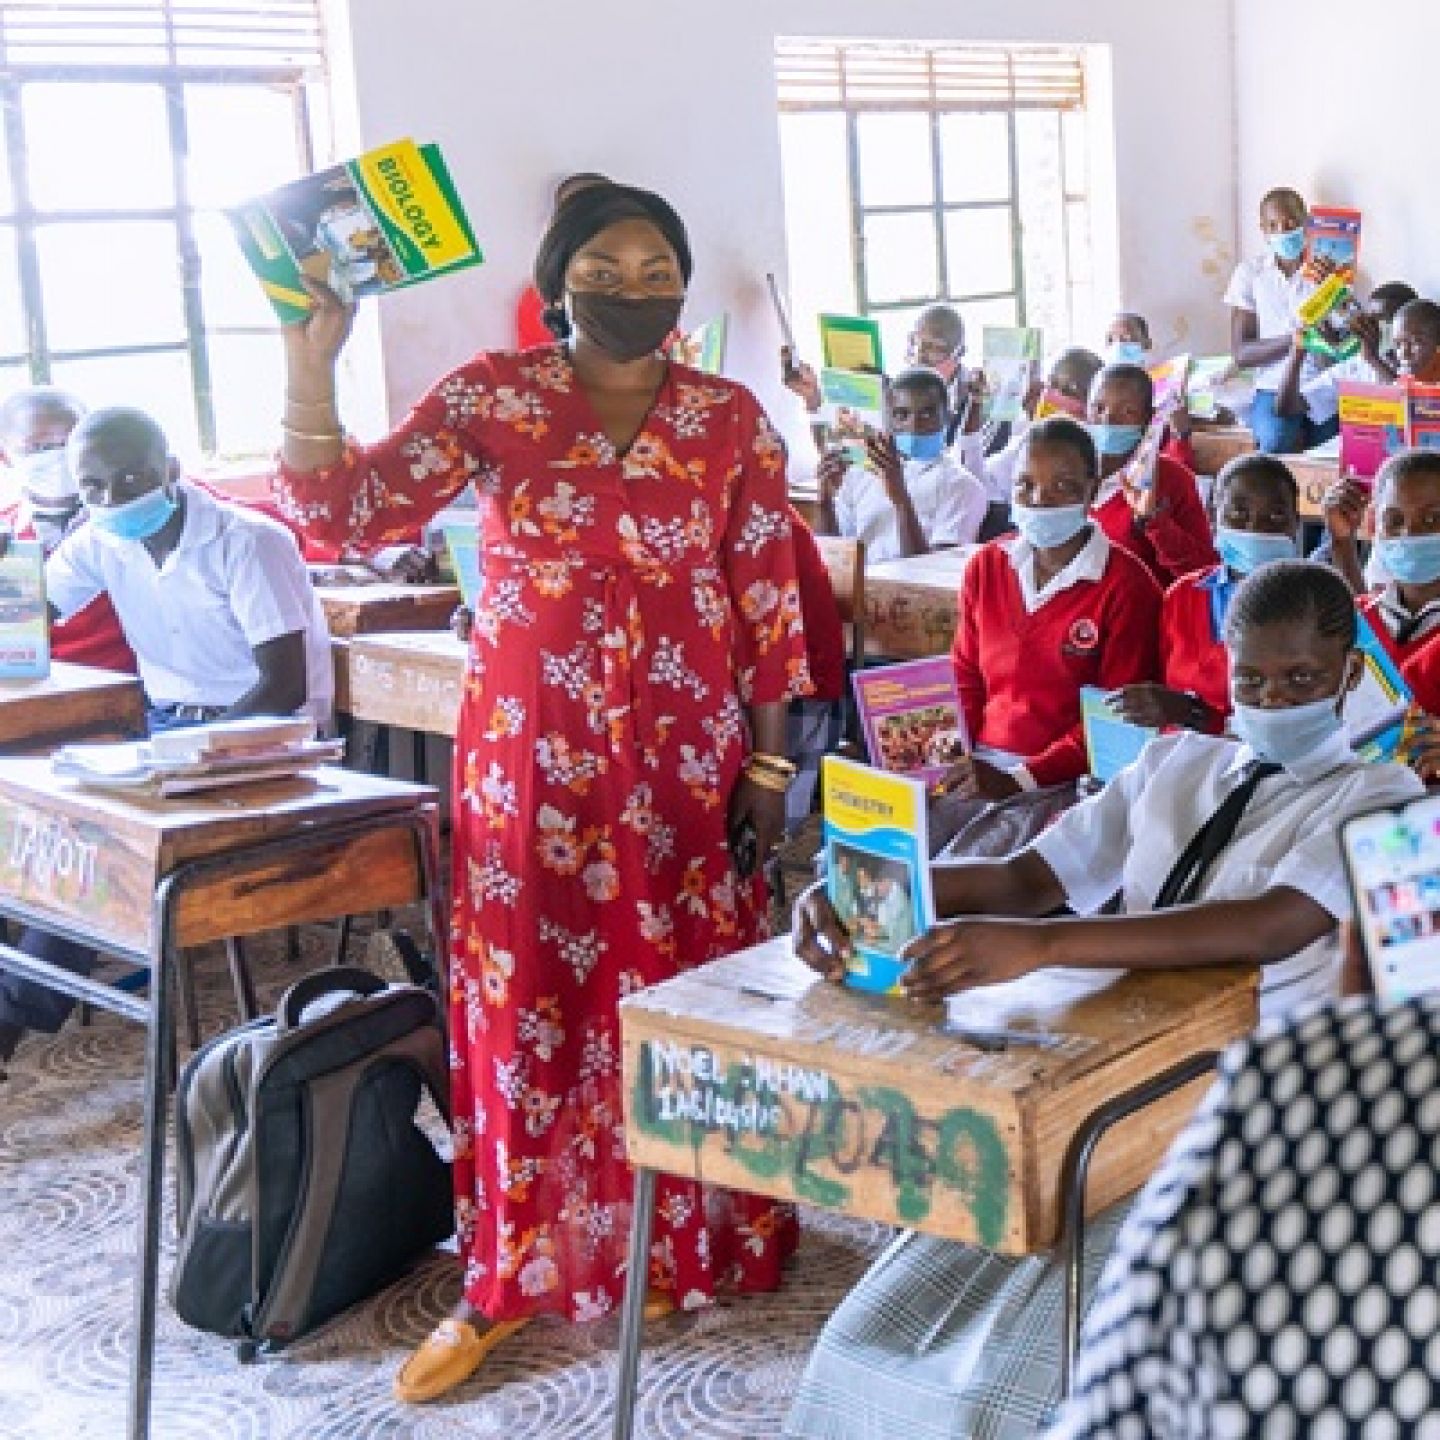 GCU graduate and 2021 Magnusson Award winner Tabitha Nyariki, with students in a classroom of Imprezza Academy in Kenya that she helped rebuild and restock the school library.